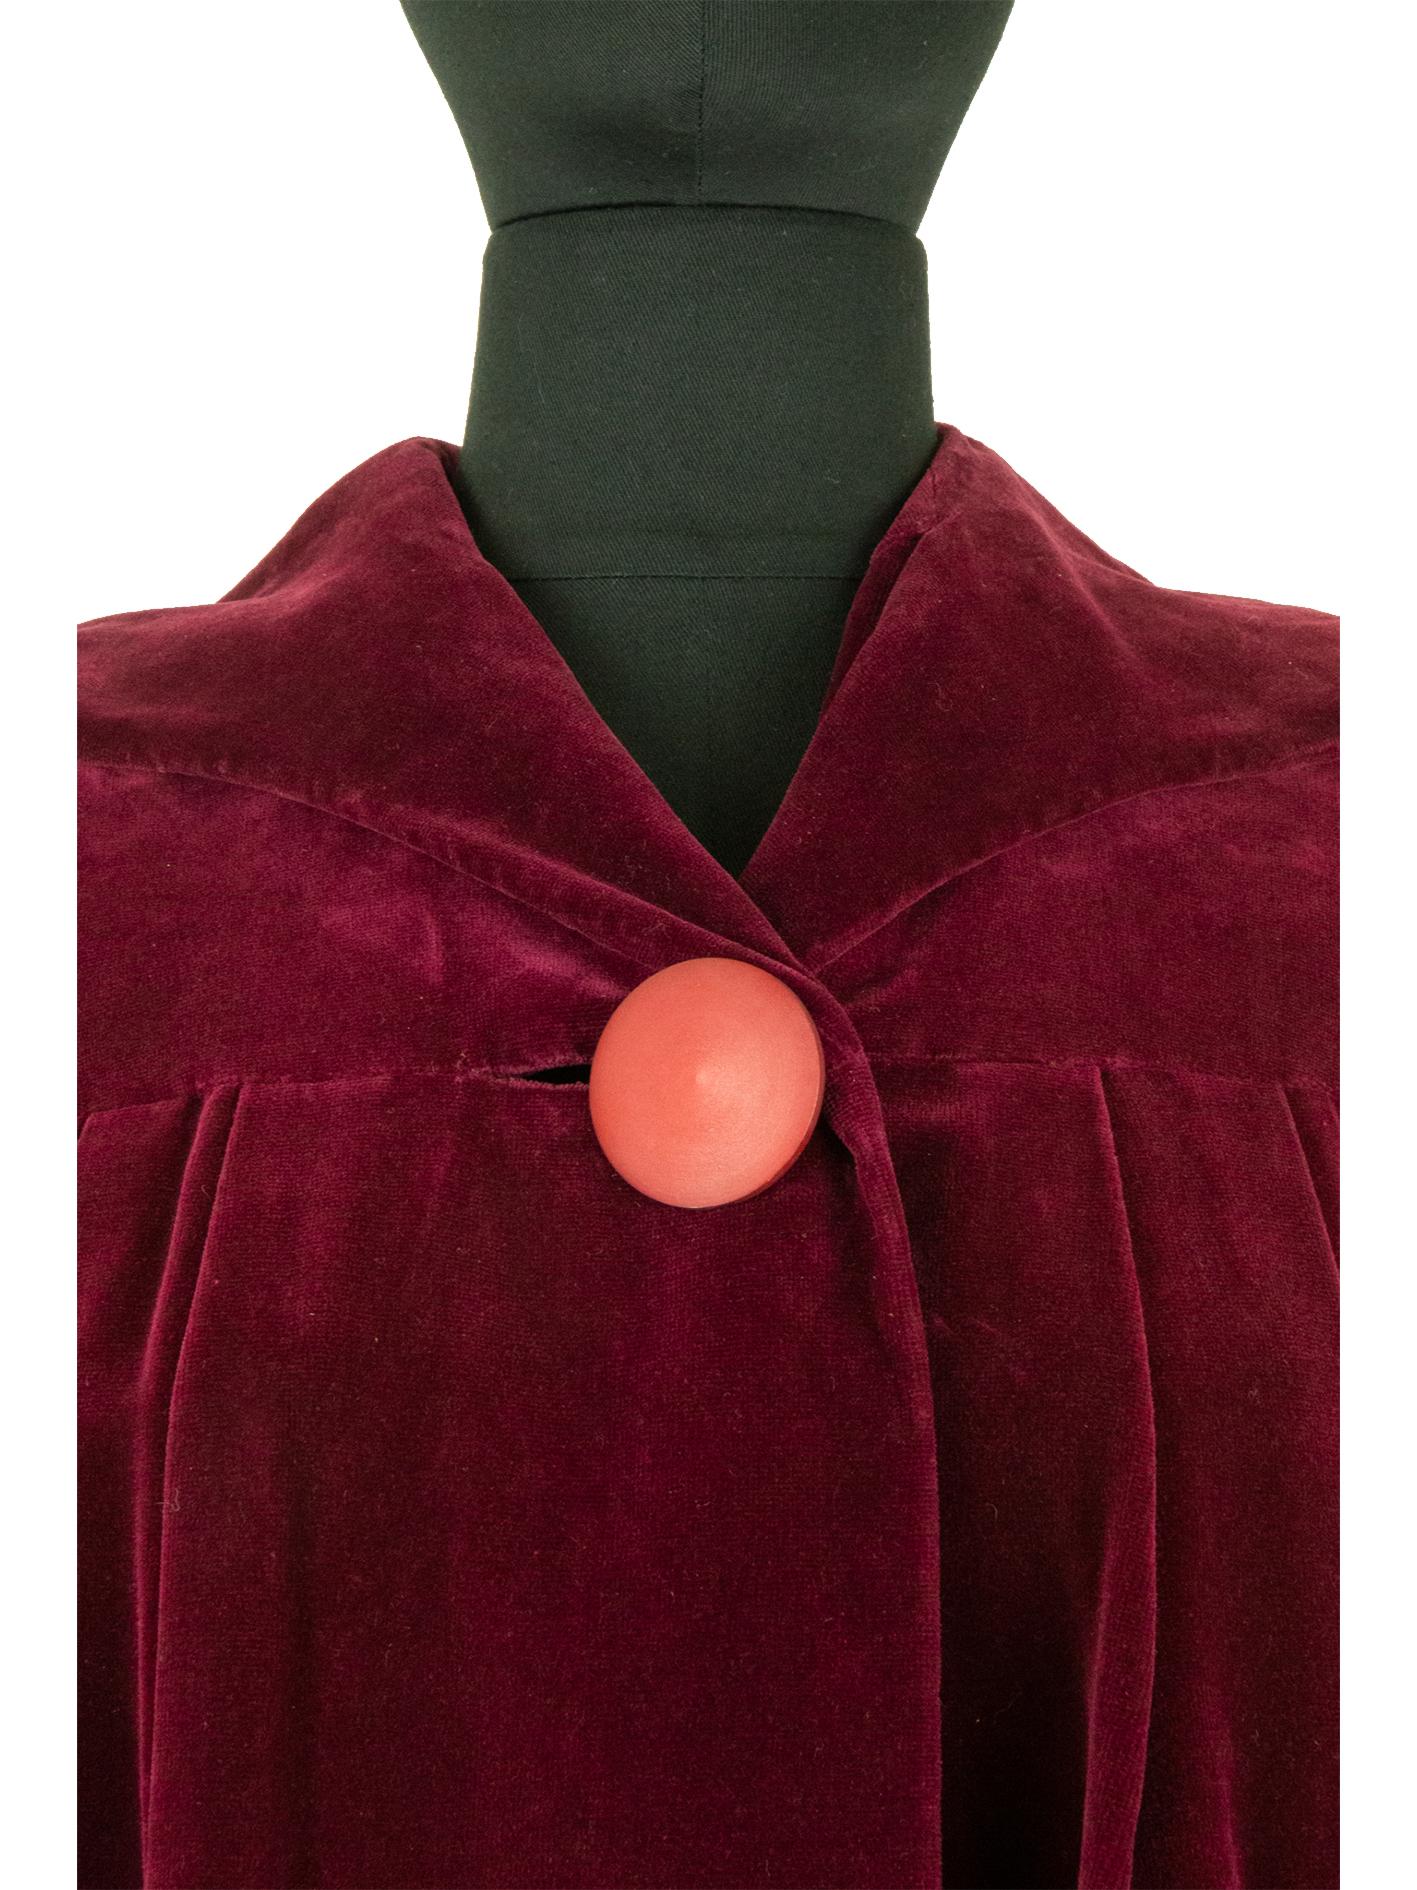 1950s Lucile Manguin Burgundy Red Cloak In Good Condition For Sale In London, GB